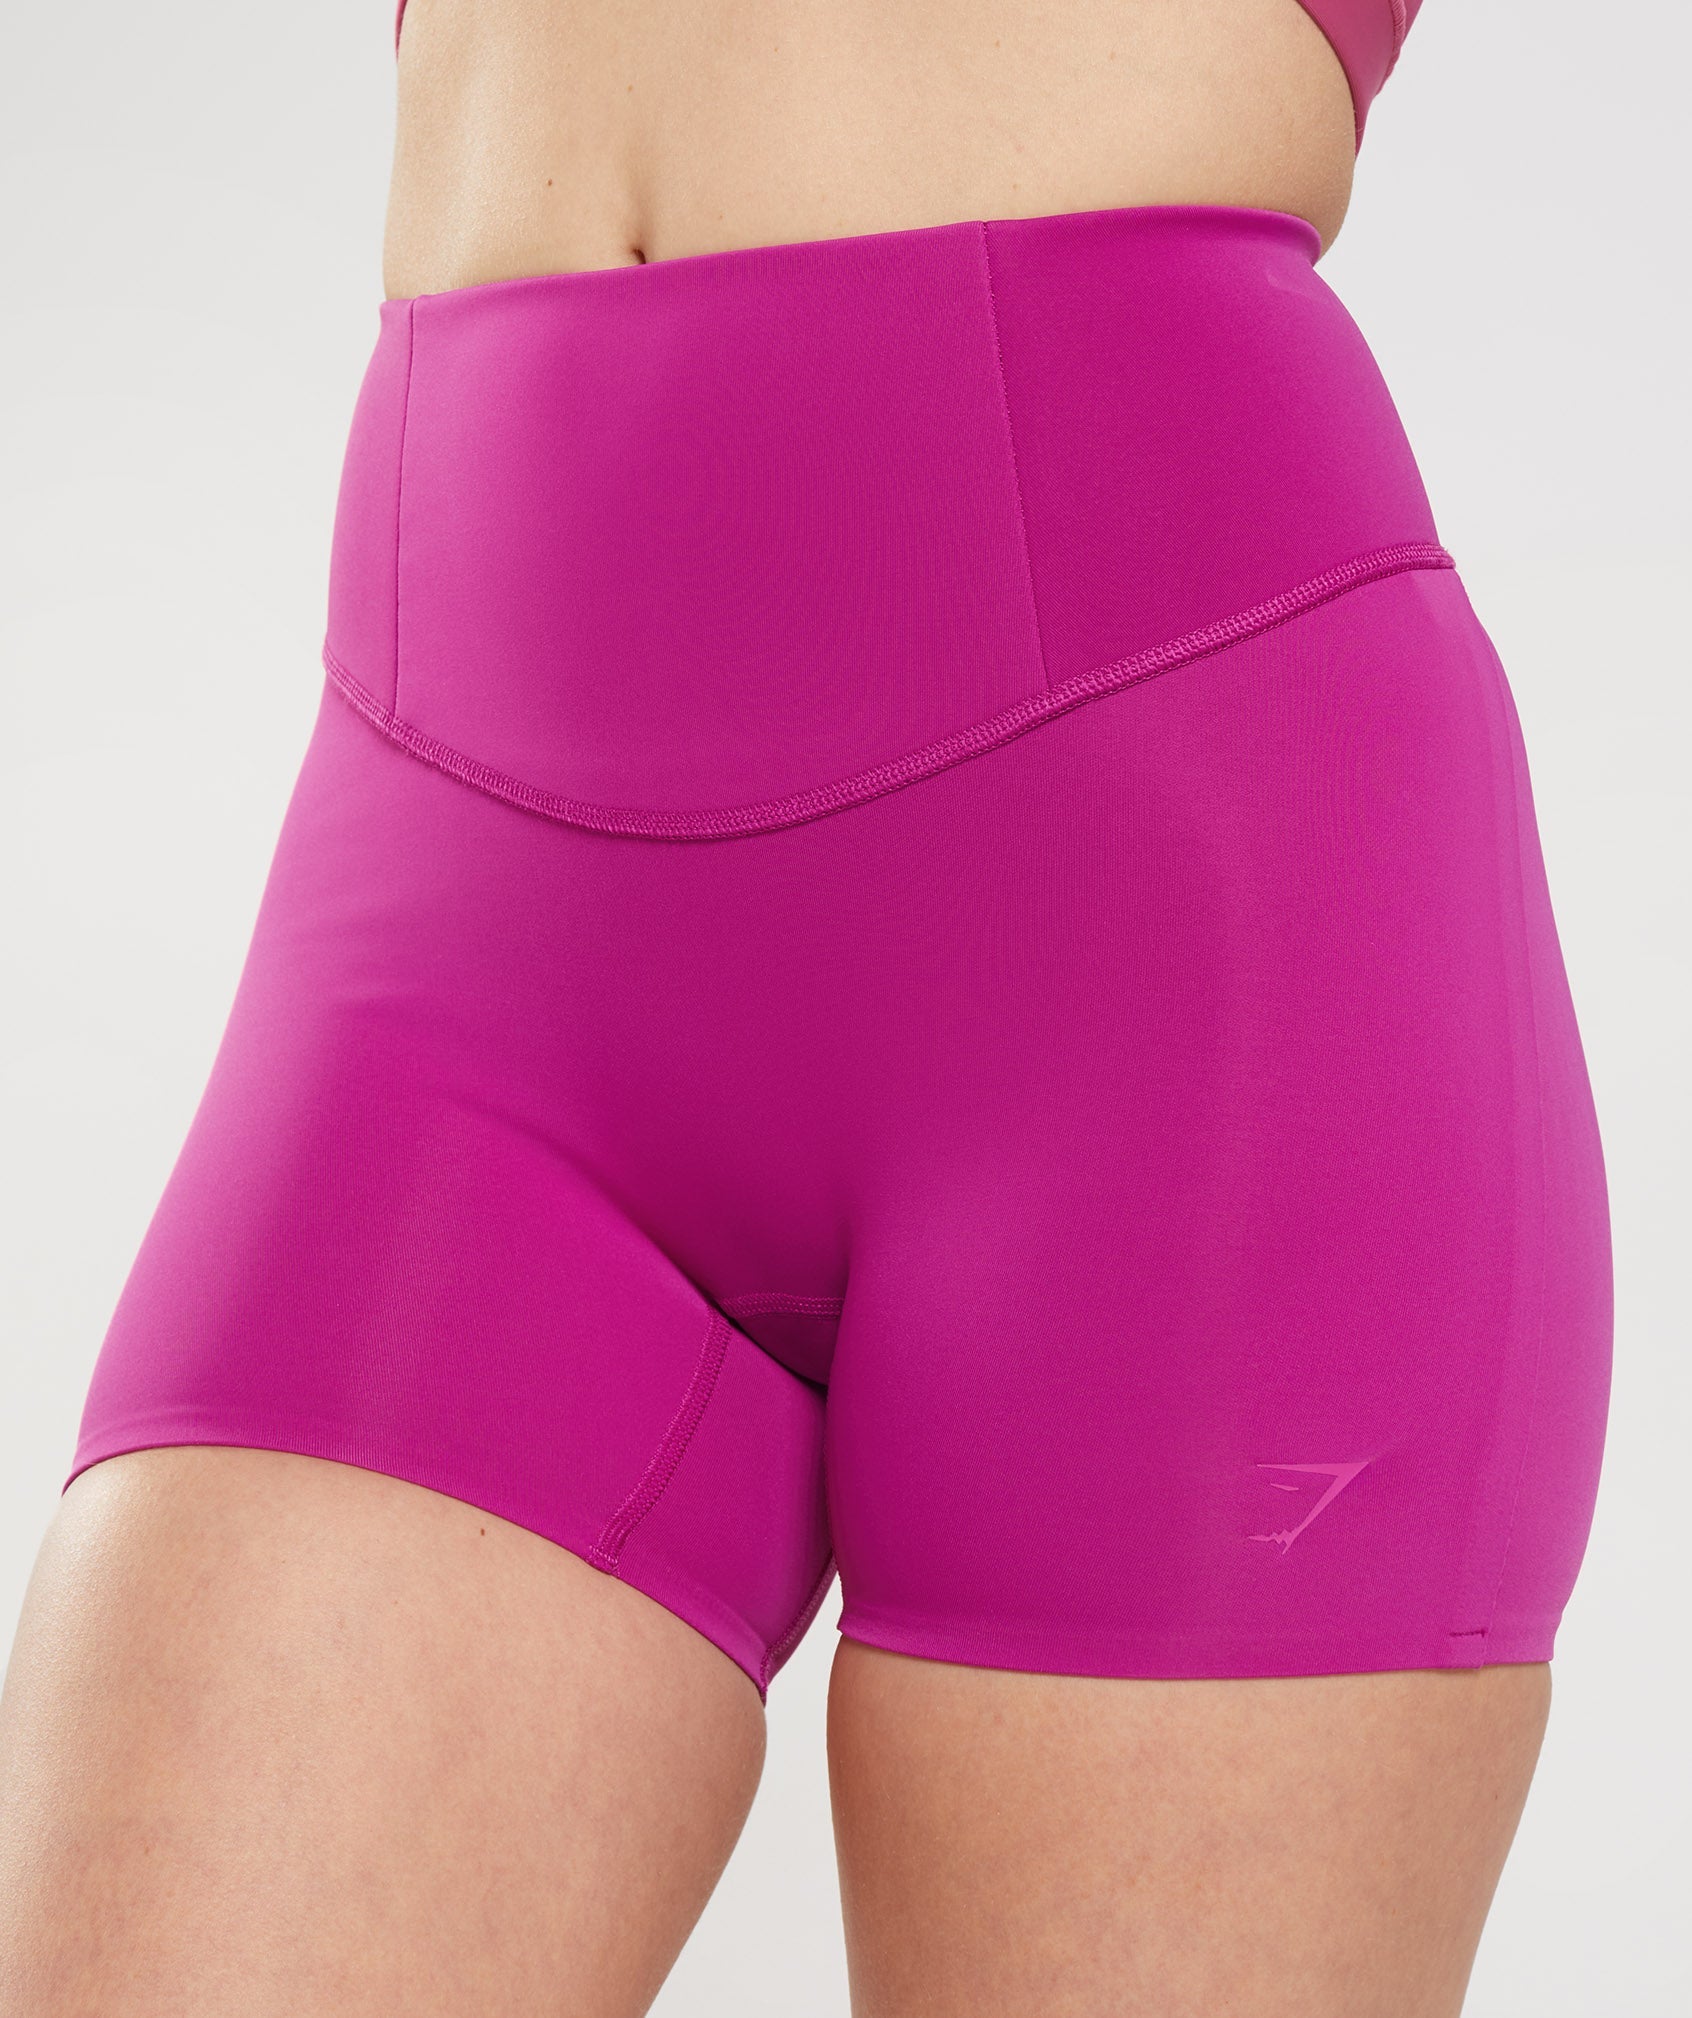 Studio Shorts in Dragon Pink - view 7